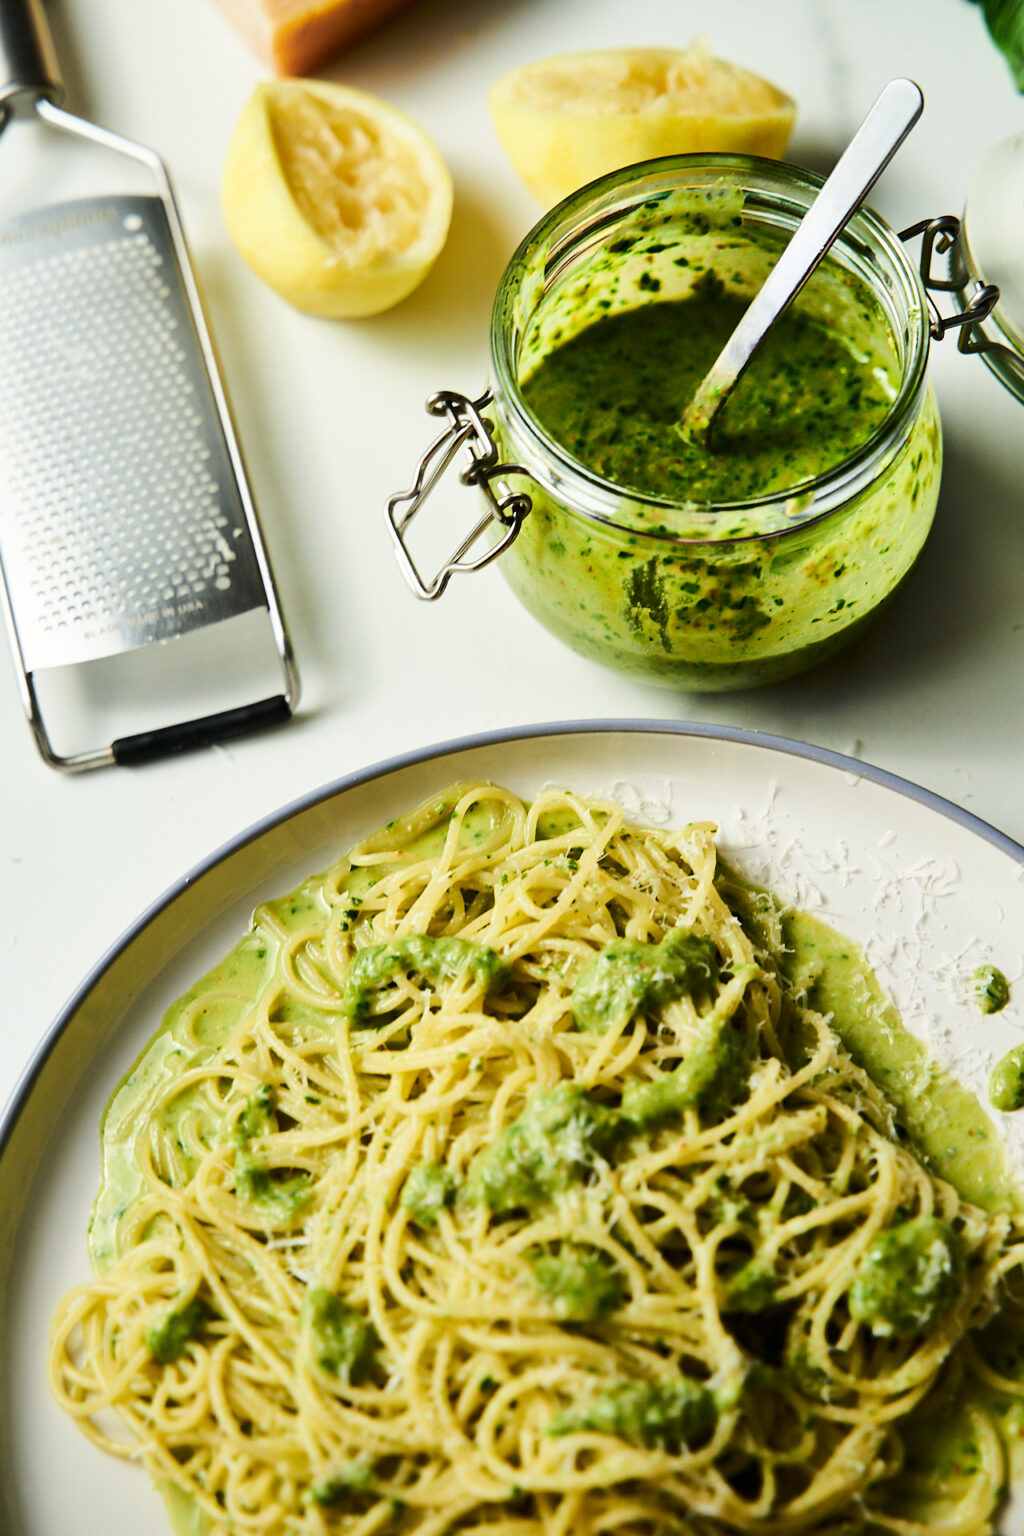 Lemon pesto in a jar and with pasta on a platter